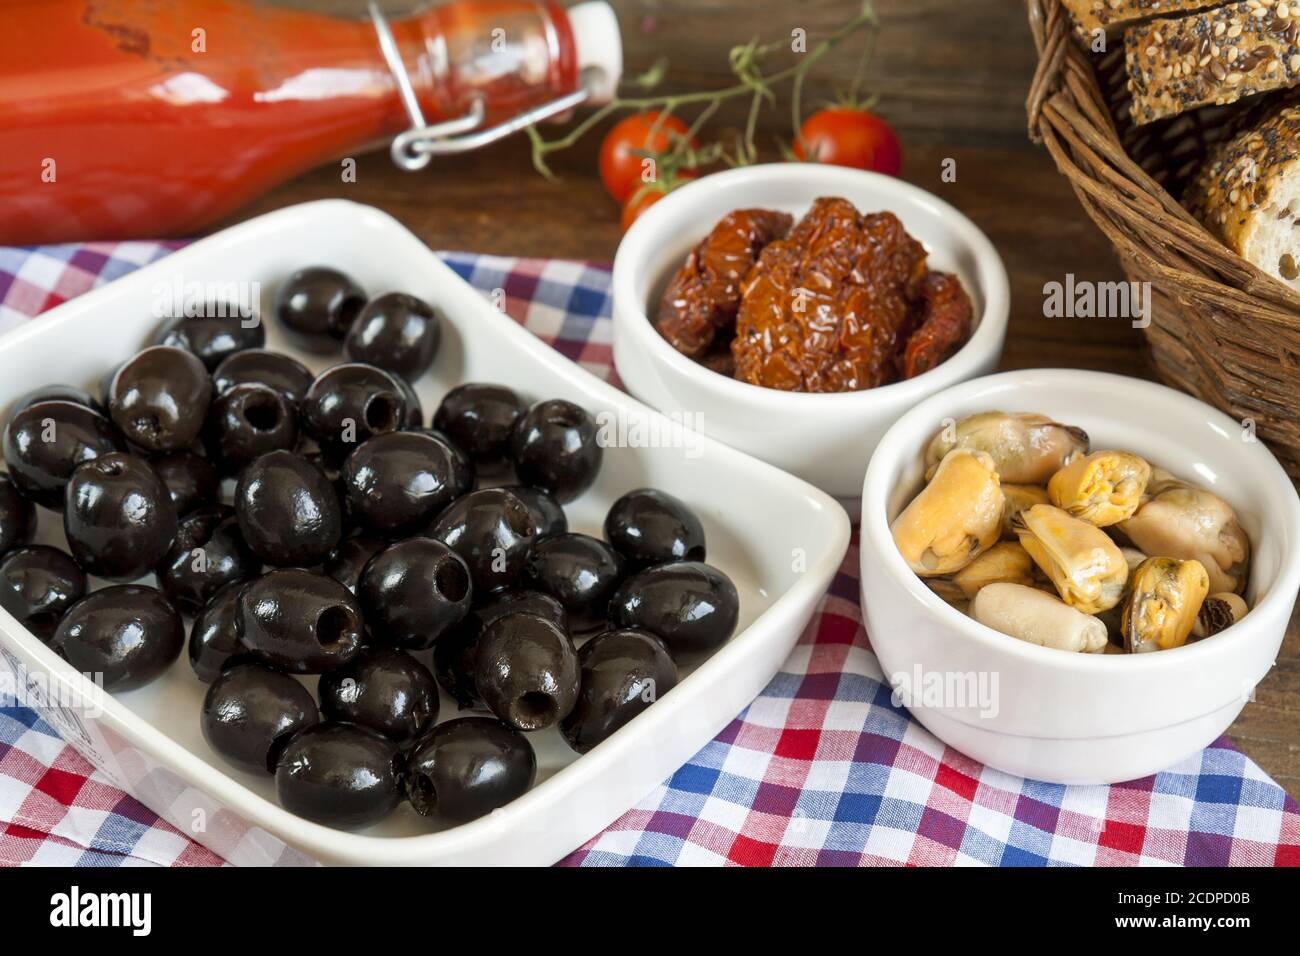 Black olives, sun dried tomatoes and mussels in ceramic bowls Stock Photo